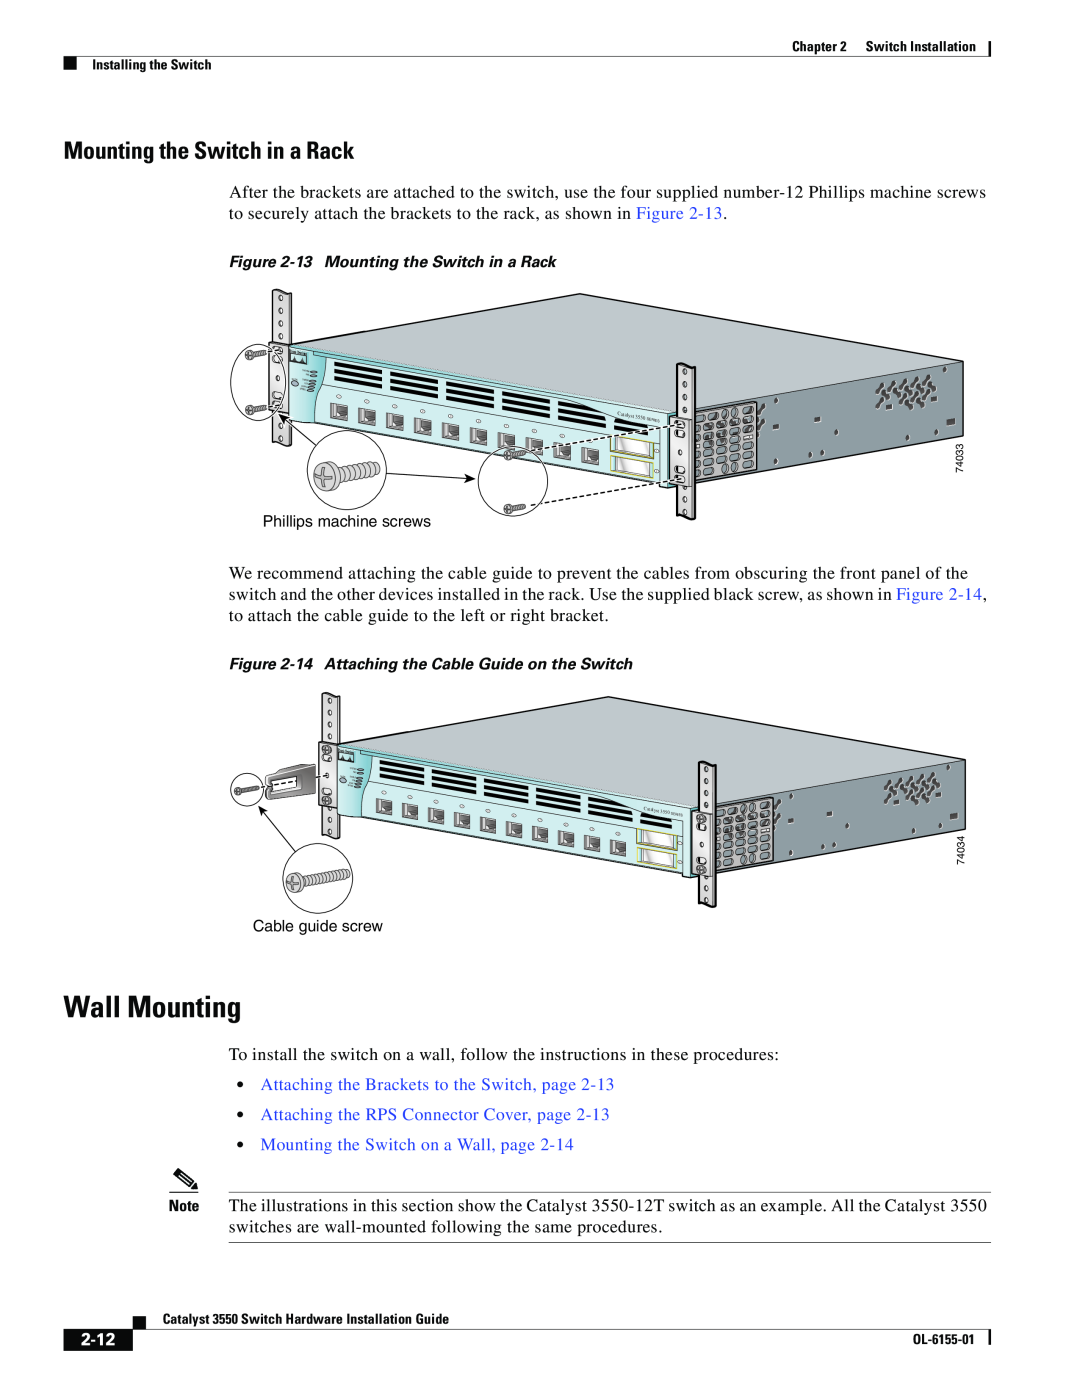 Cisco Systems 3550 manual Wall Mounting, Mounting the Switch in a Rack, Attaching the Brackets to the Switch, page, 2-12 